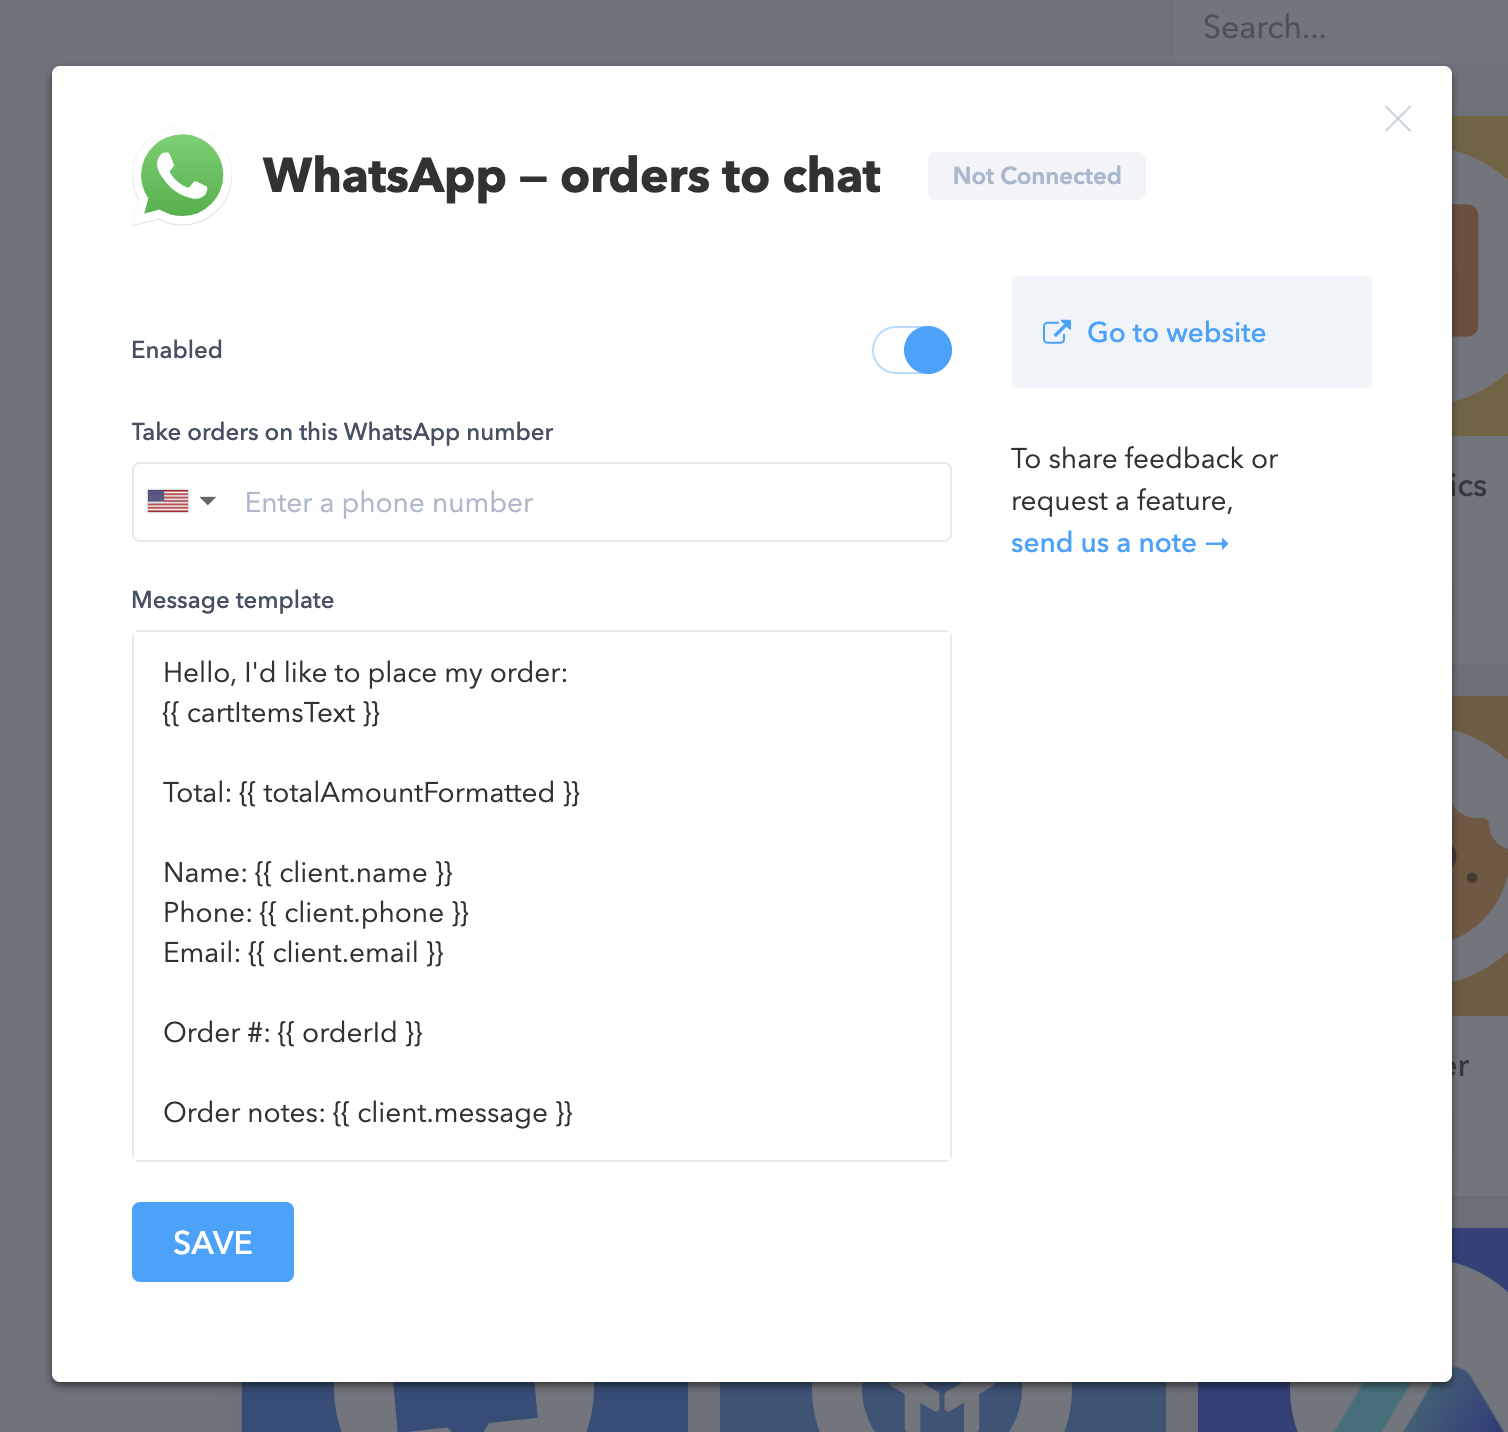 Get started with WhatsApp Ordering in 4 simple steps